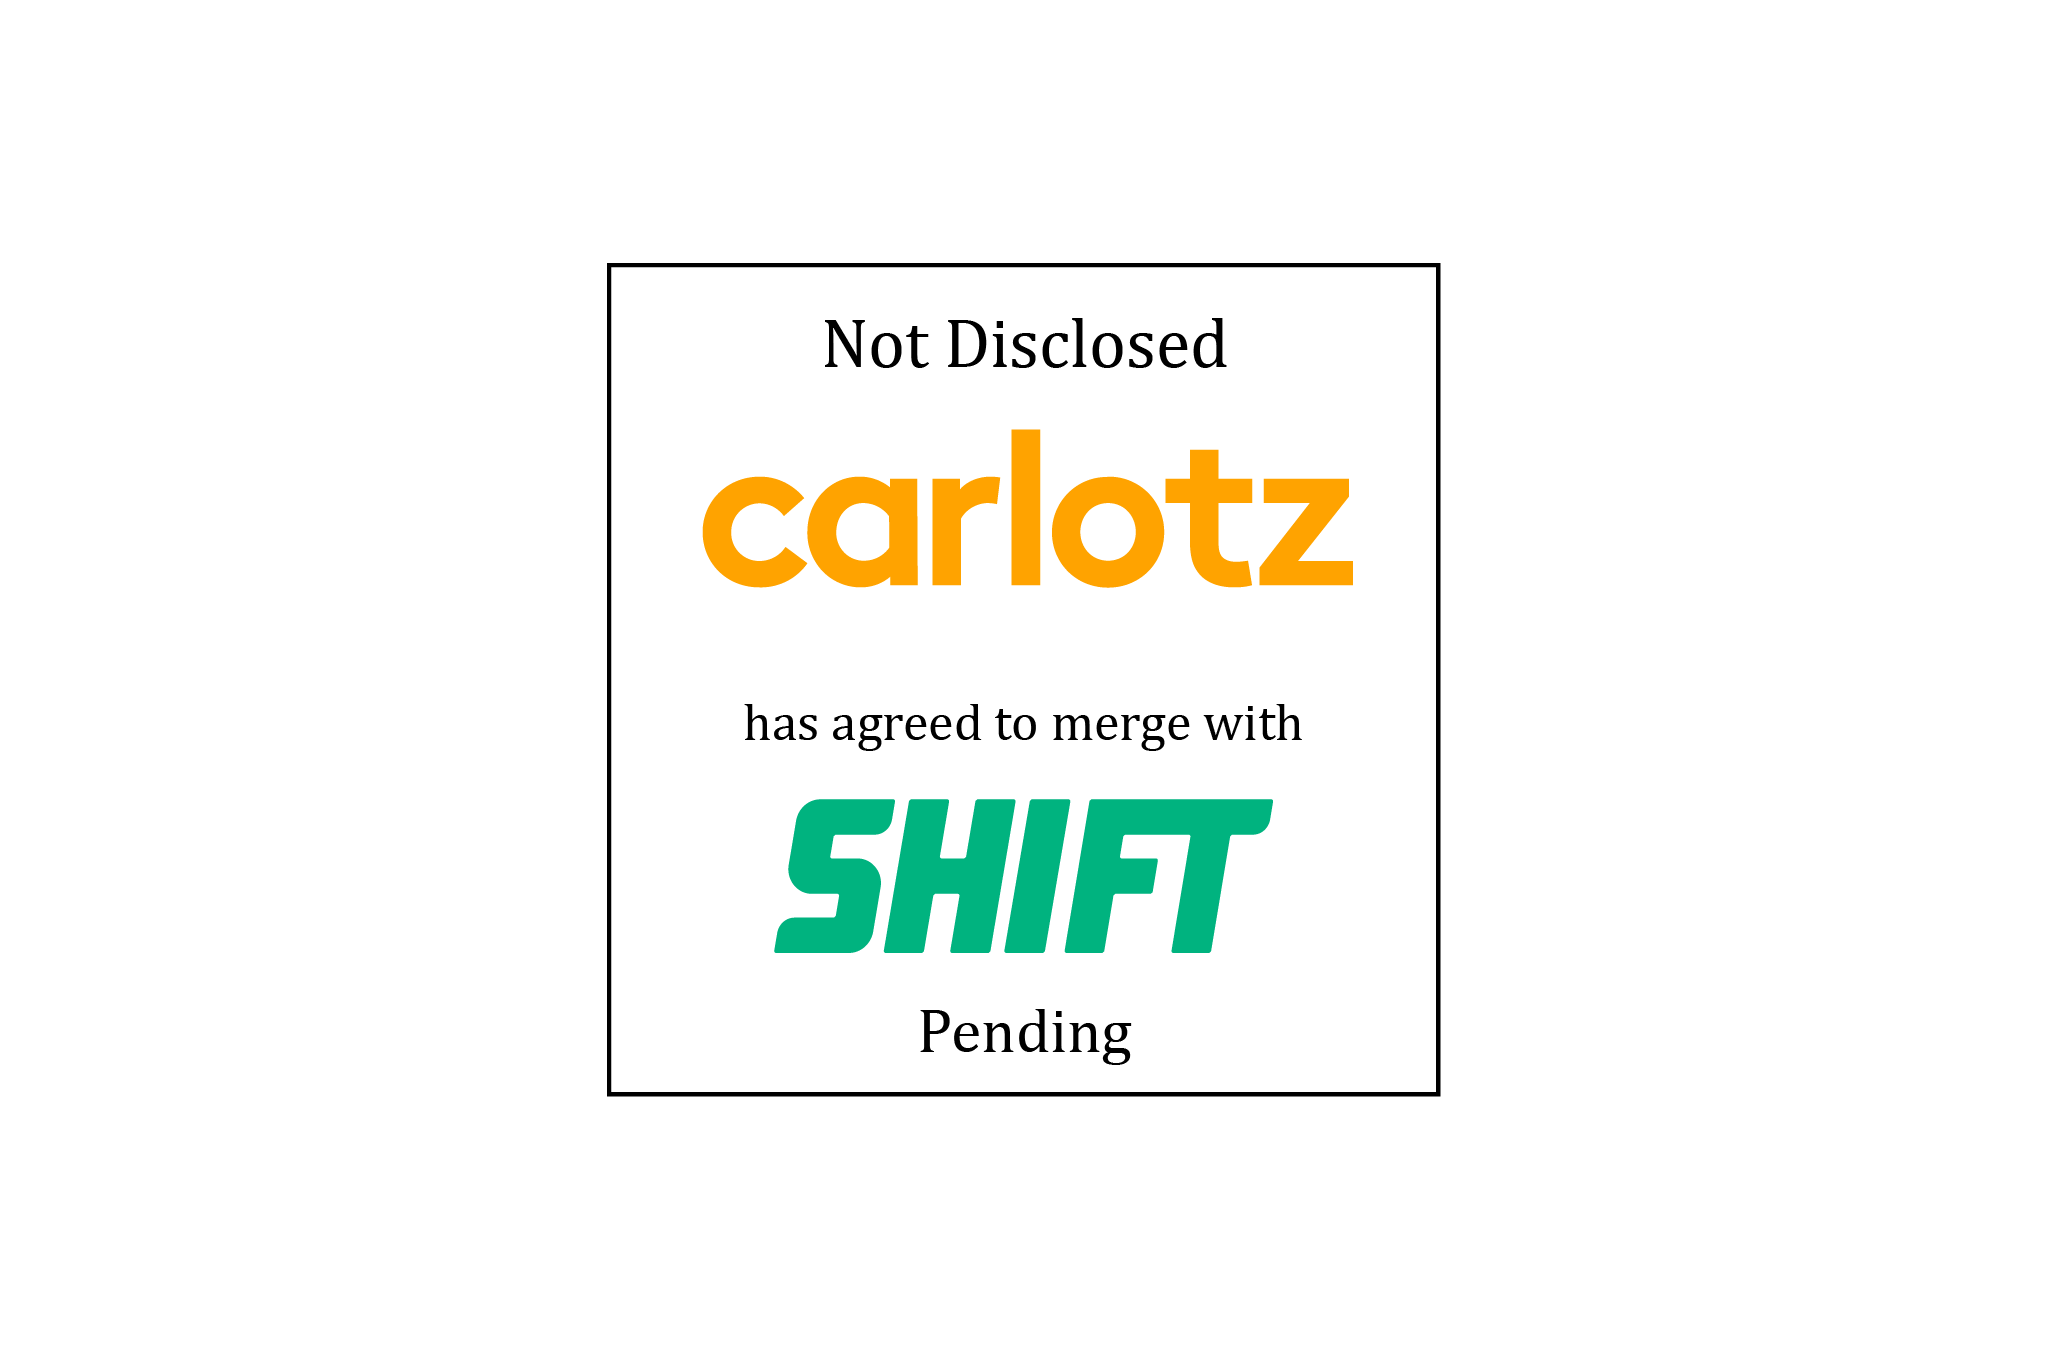 Not Disclosed | Carlotz (logo) has agreed to merge with Shift (logo) | Pending